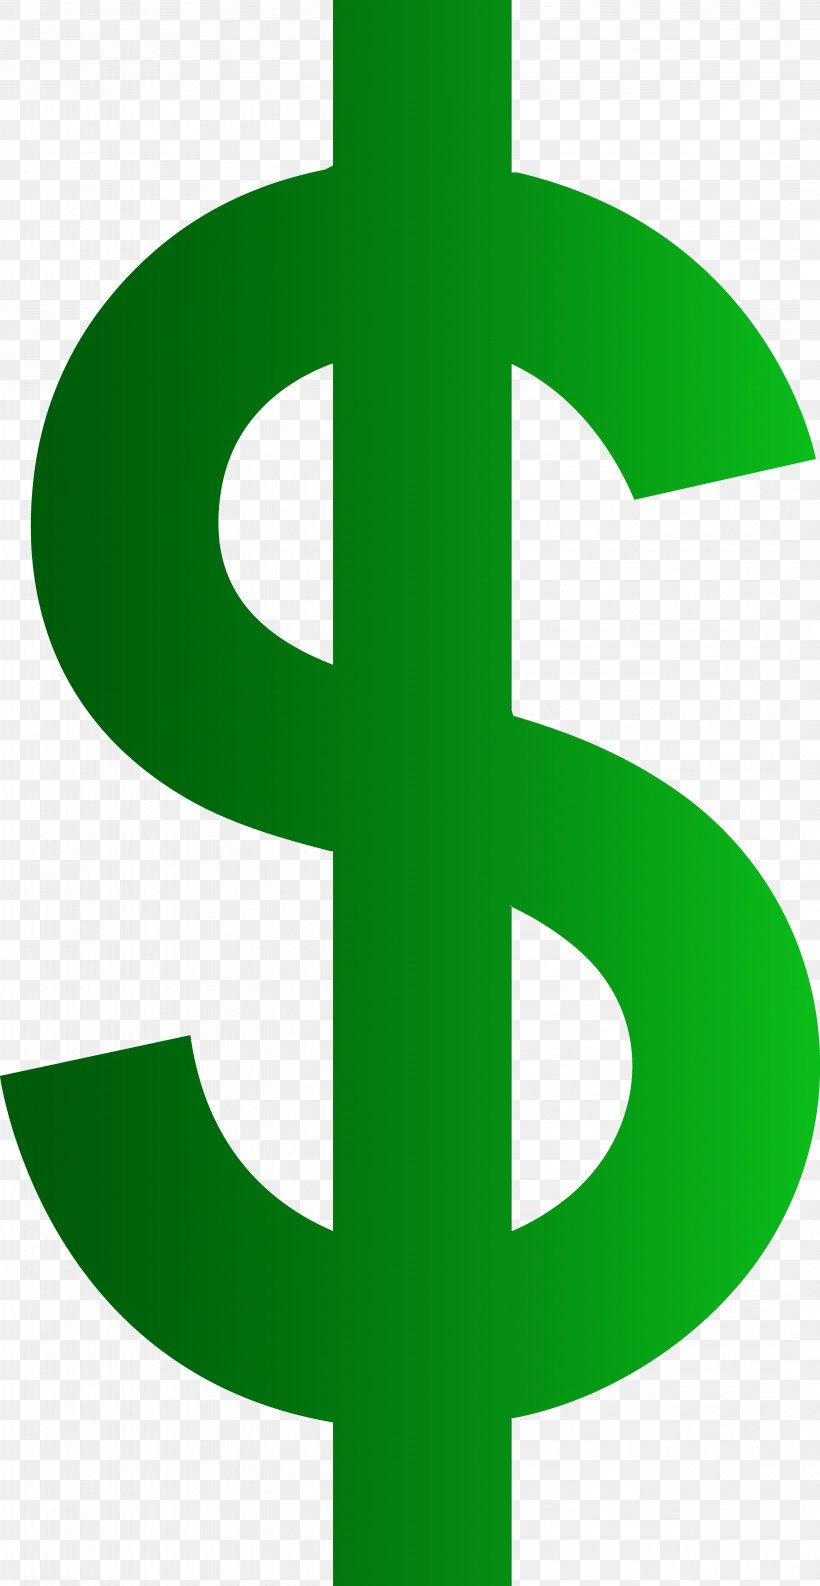 Dollar Sign United States Dollar Clip Art, PNG, 4276x8271px, Dollar Sign, Artwork, At Sign, Coin, Currency Sign Download Free